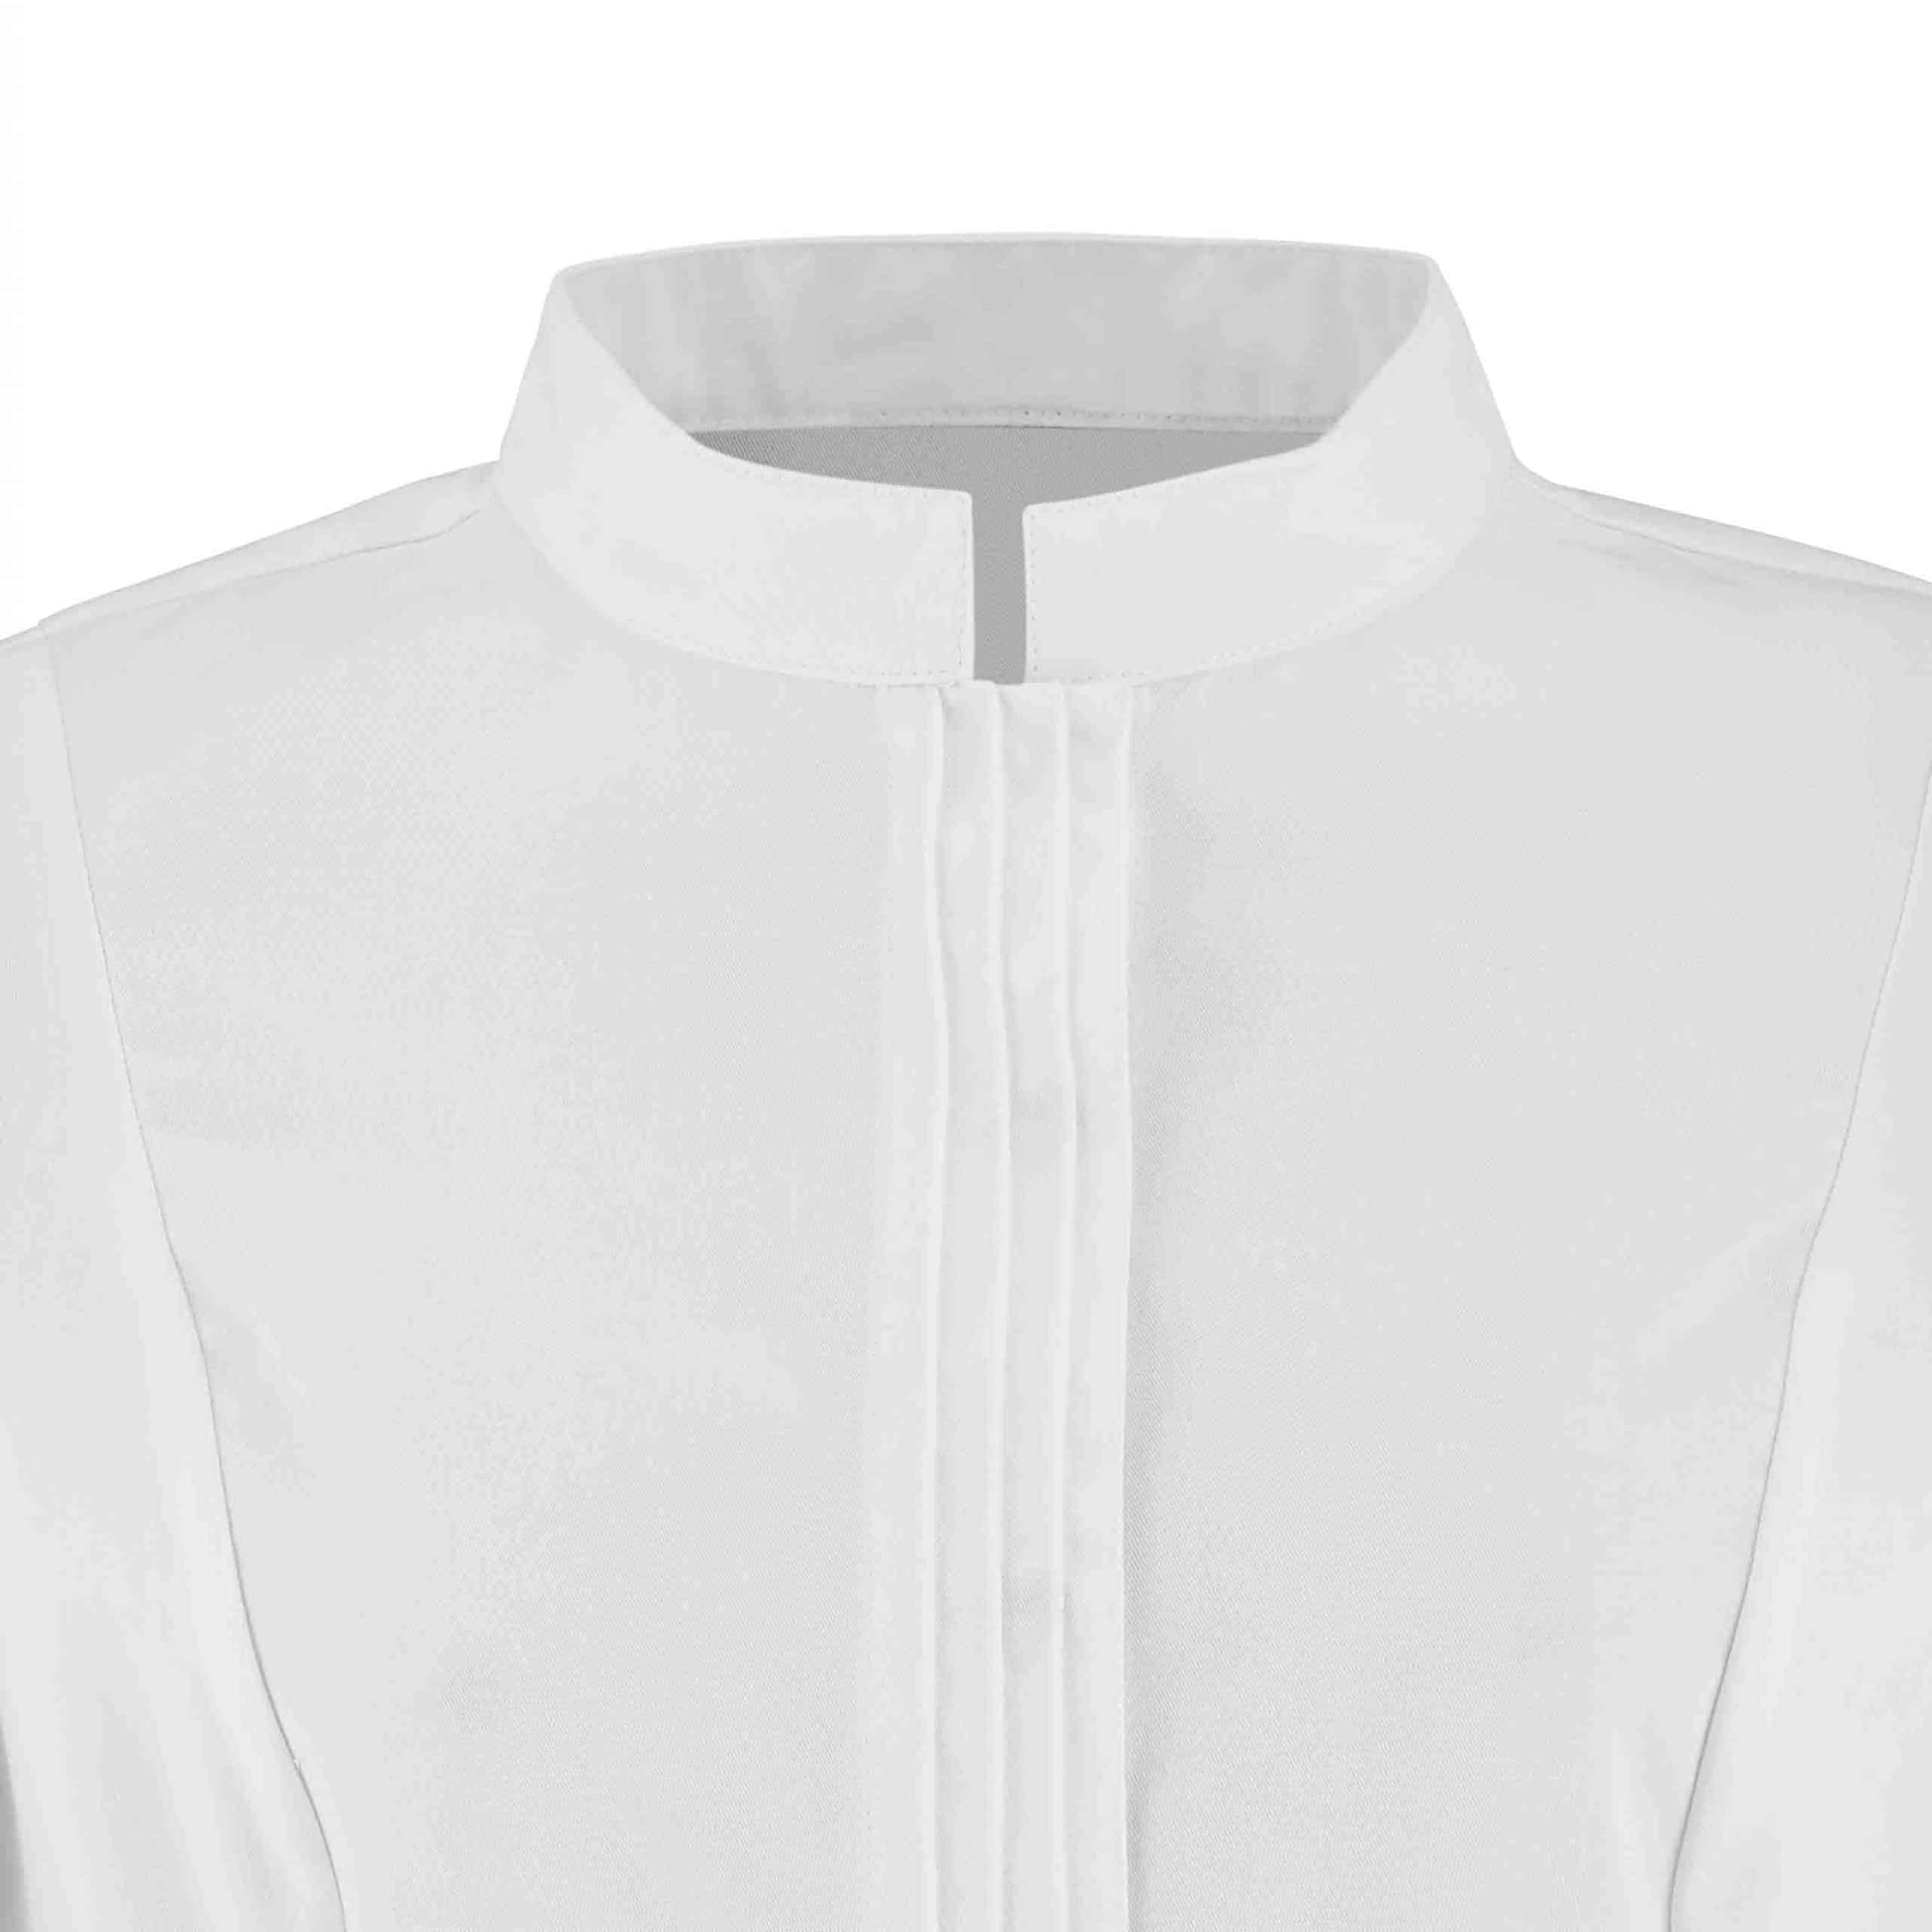 Zoom collar CRISTAL jacket short sleeves woman white.